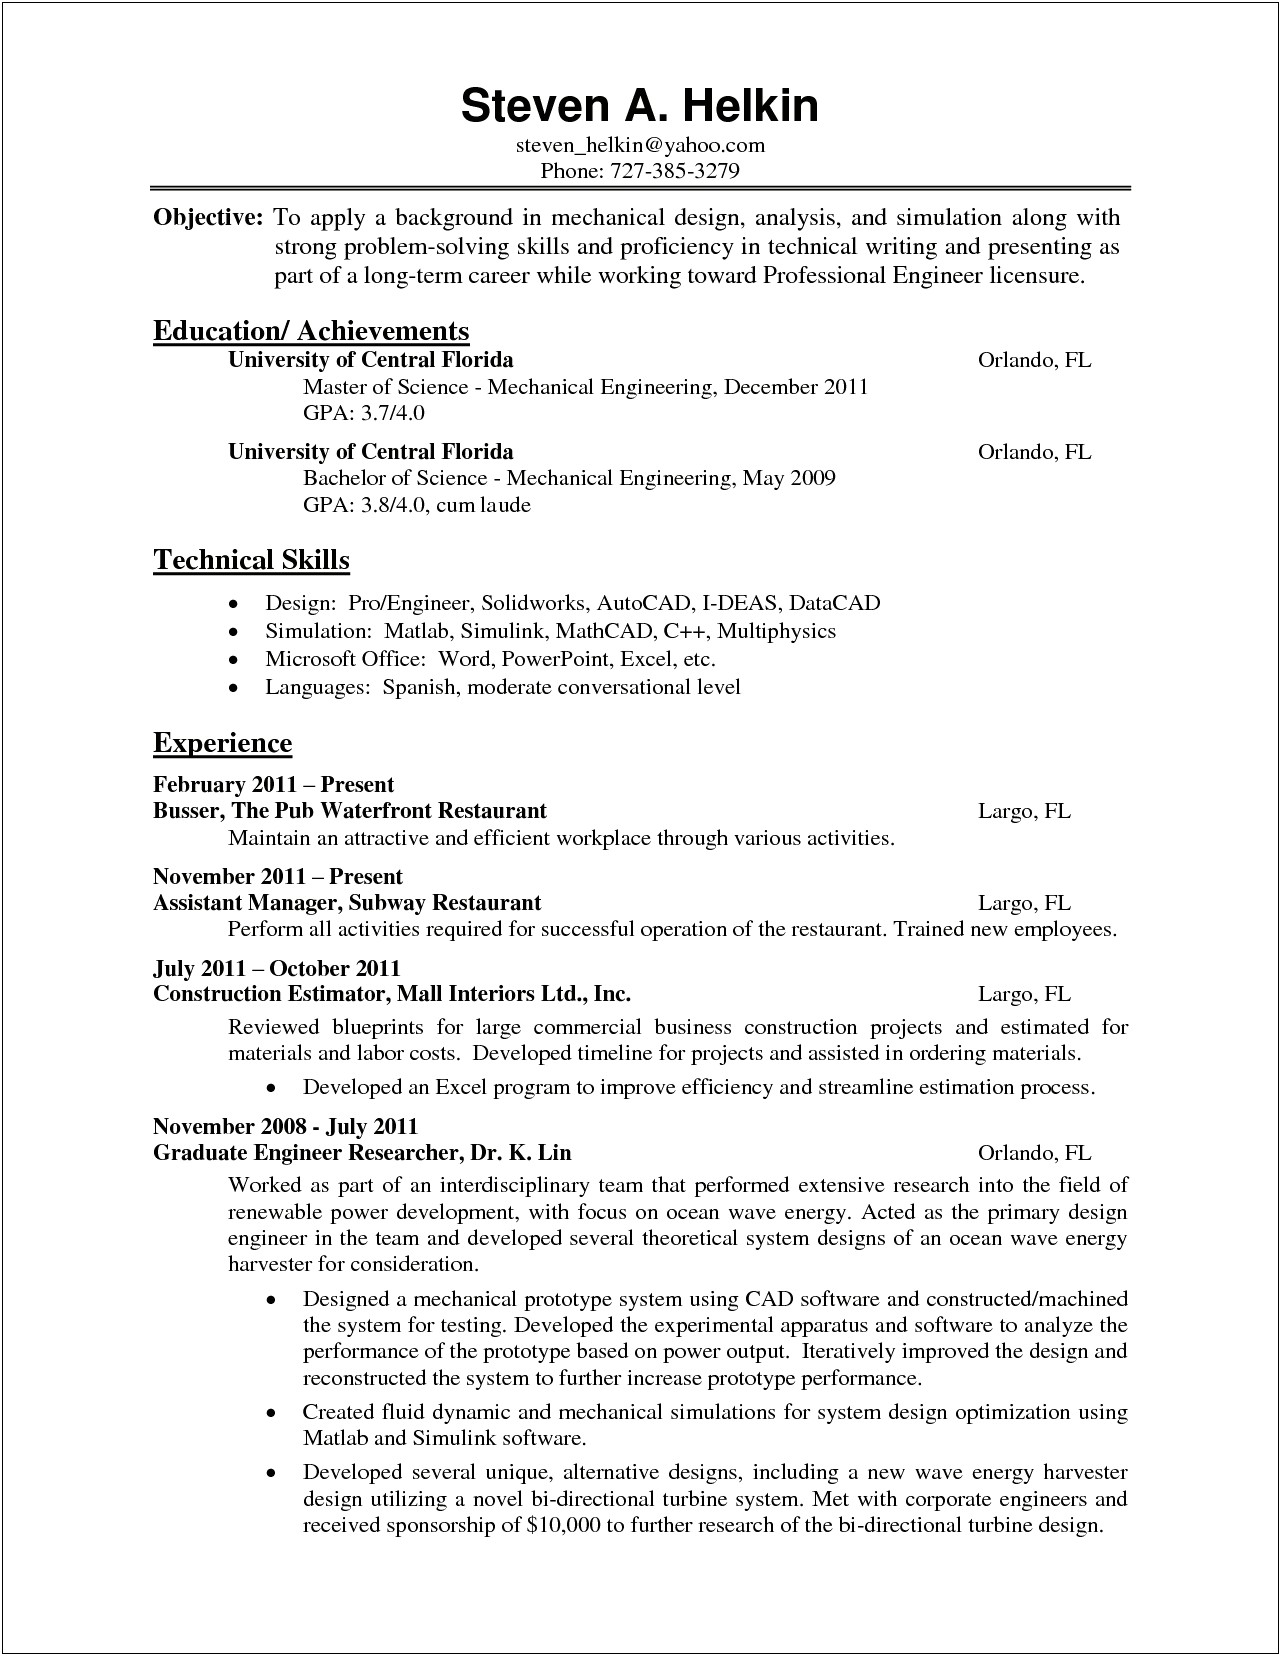 Who To Put For Reference On Resume